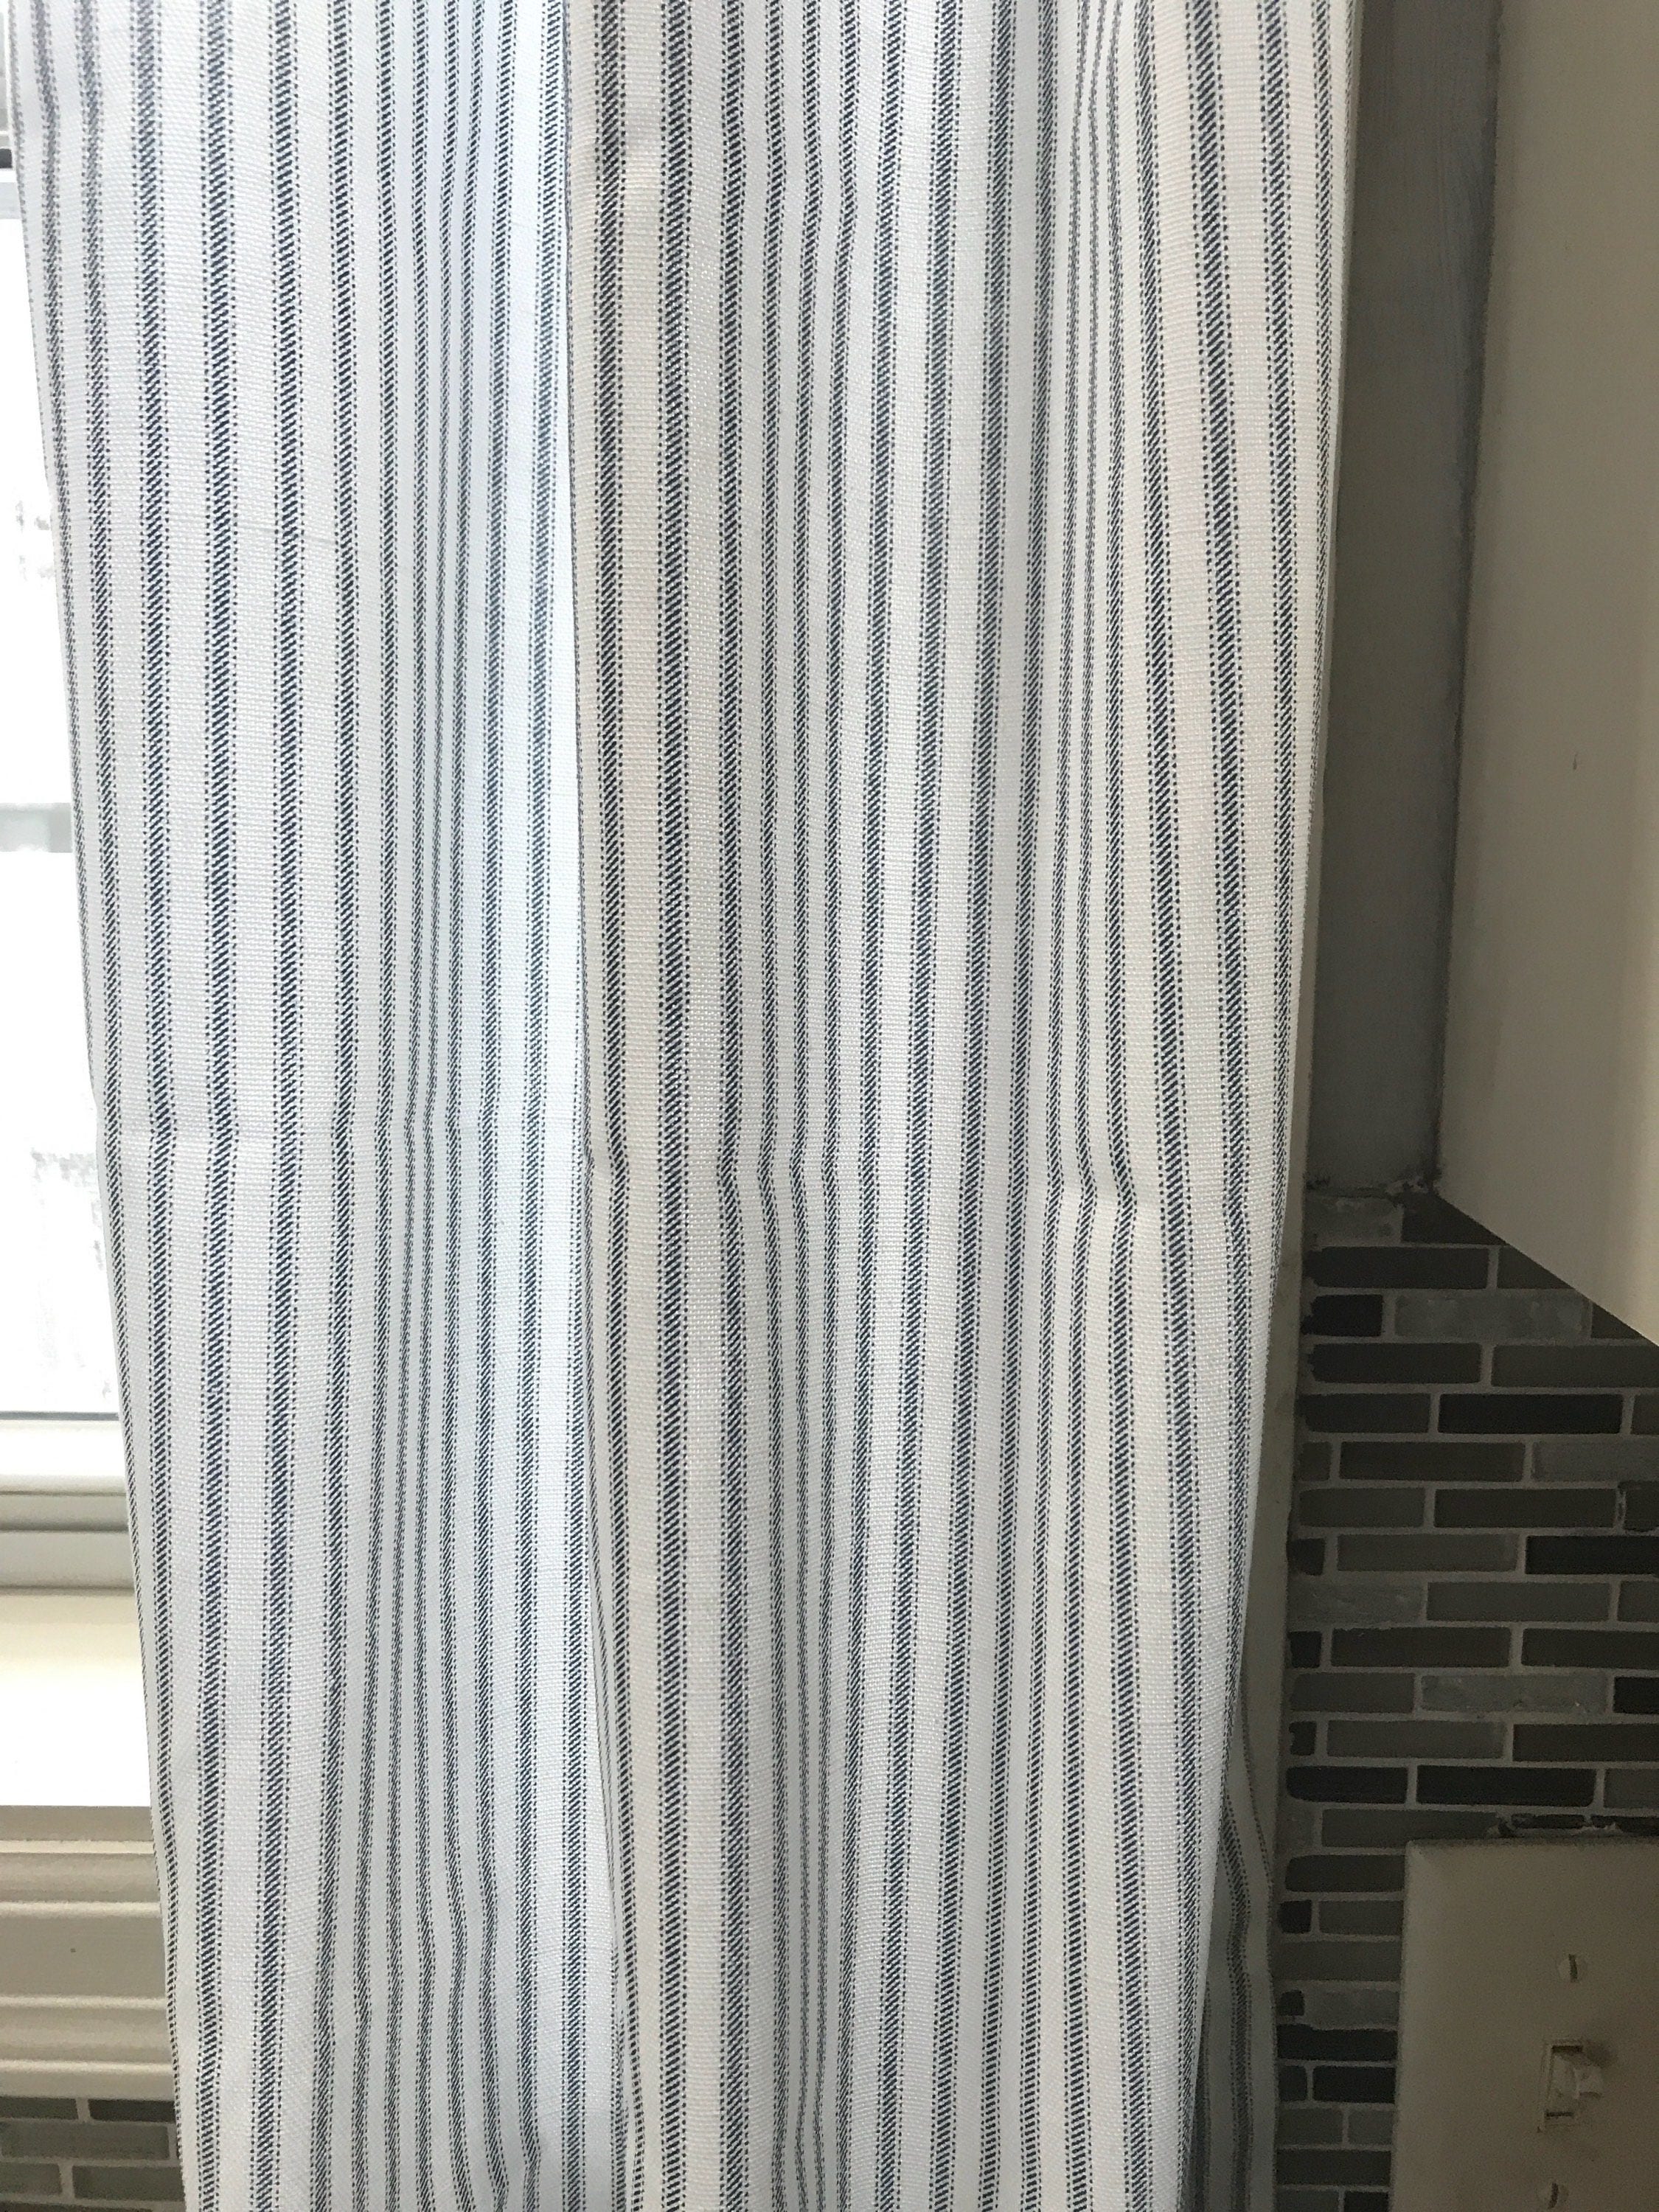 1 Pair of Curtains Ticking Striped Curtains Classic Stripe | Etsy